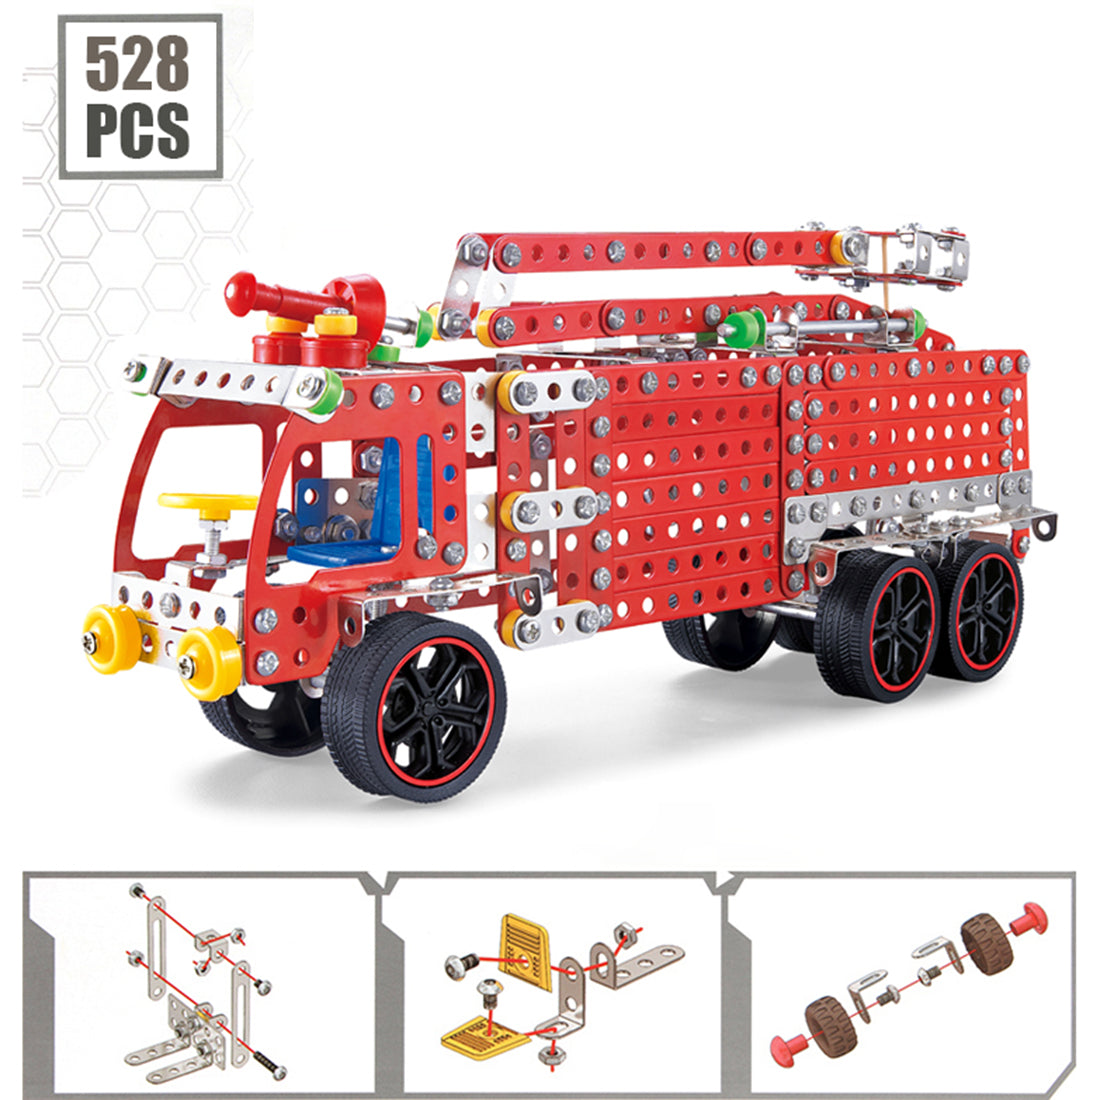 528Pcs Assembly Metal Fire Fighting Aerial Ladder Firetruck Model Kit STEM Engineering Education Toy